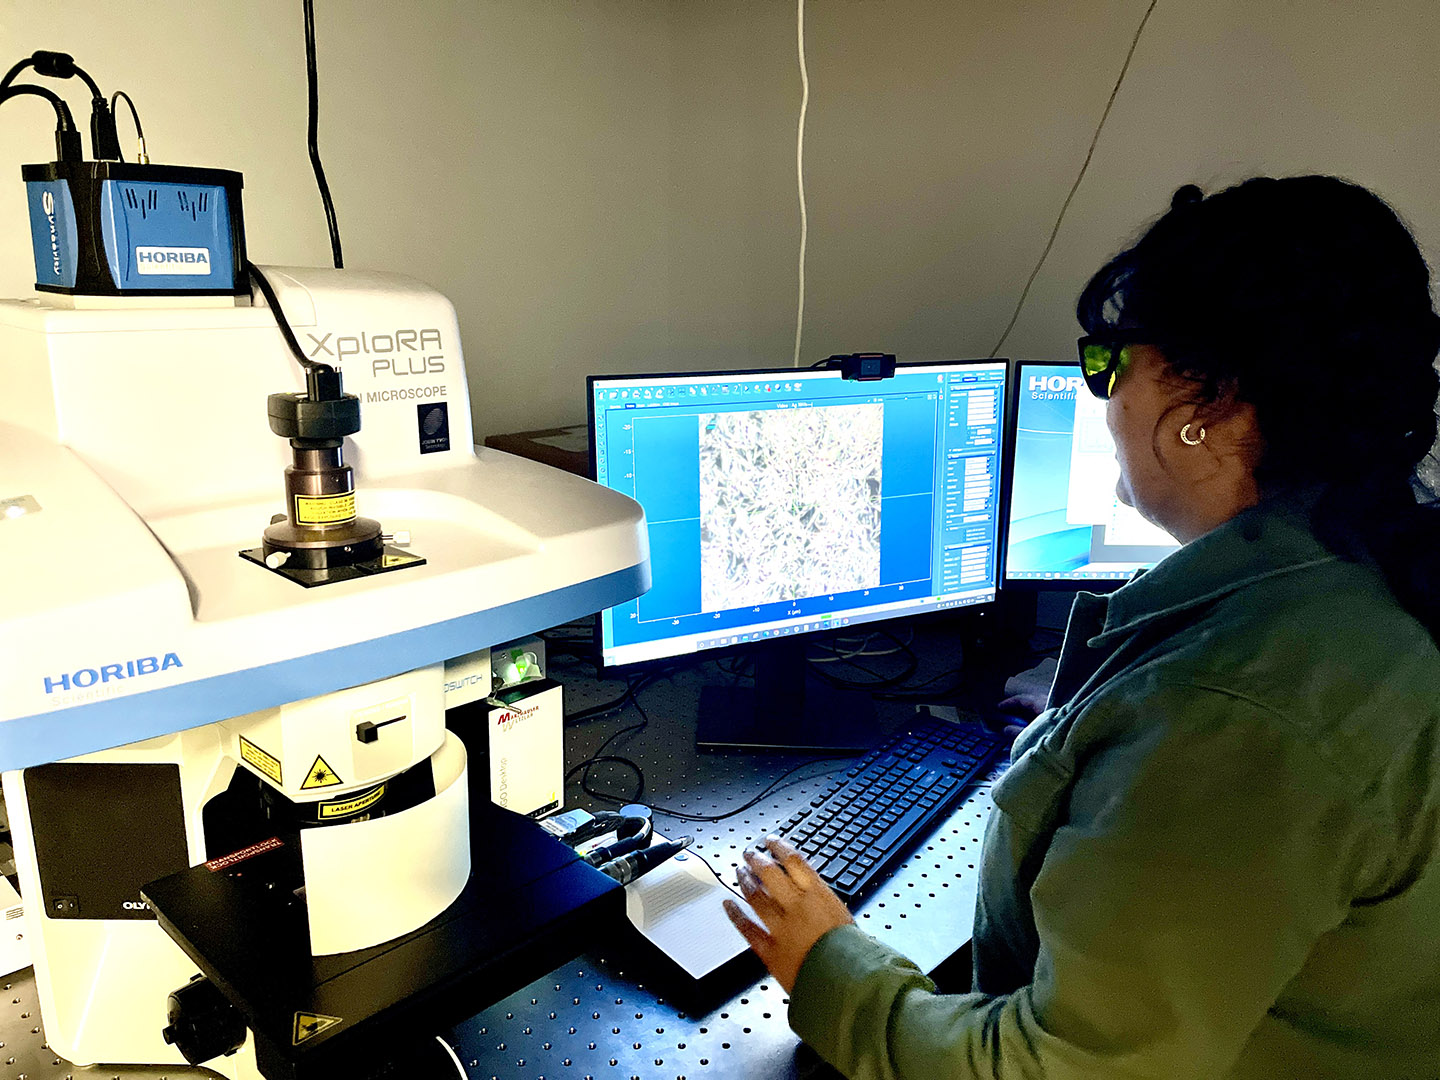 Marian gathering images for her project, "Using surface-enhanced Raman spectroscopy (SERS) to detect breast cancer."